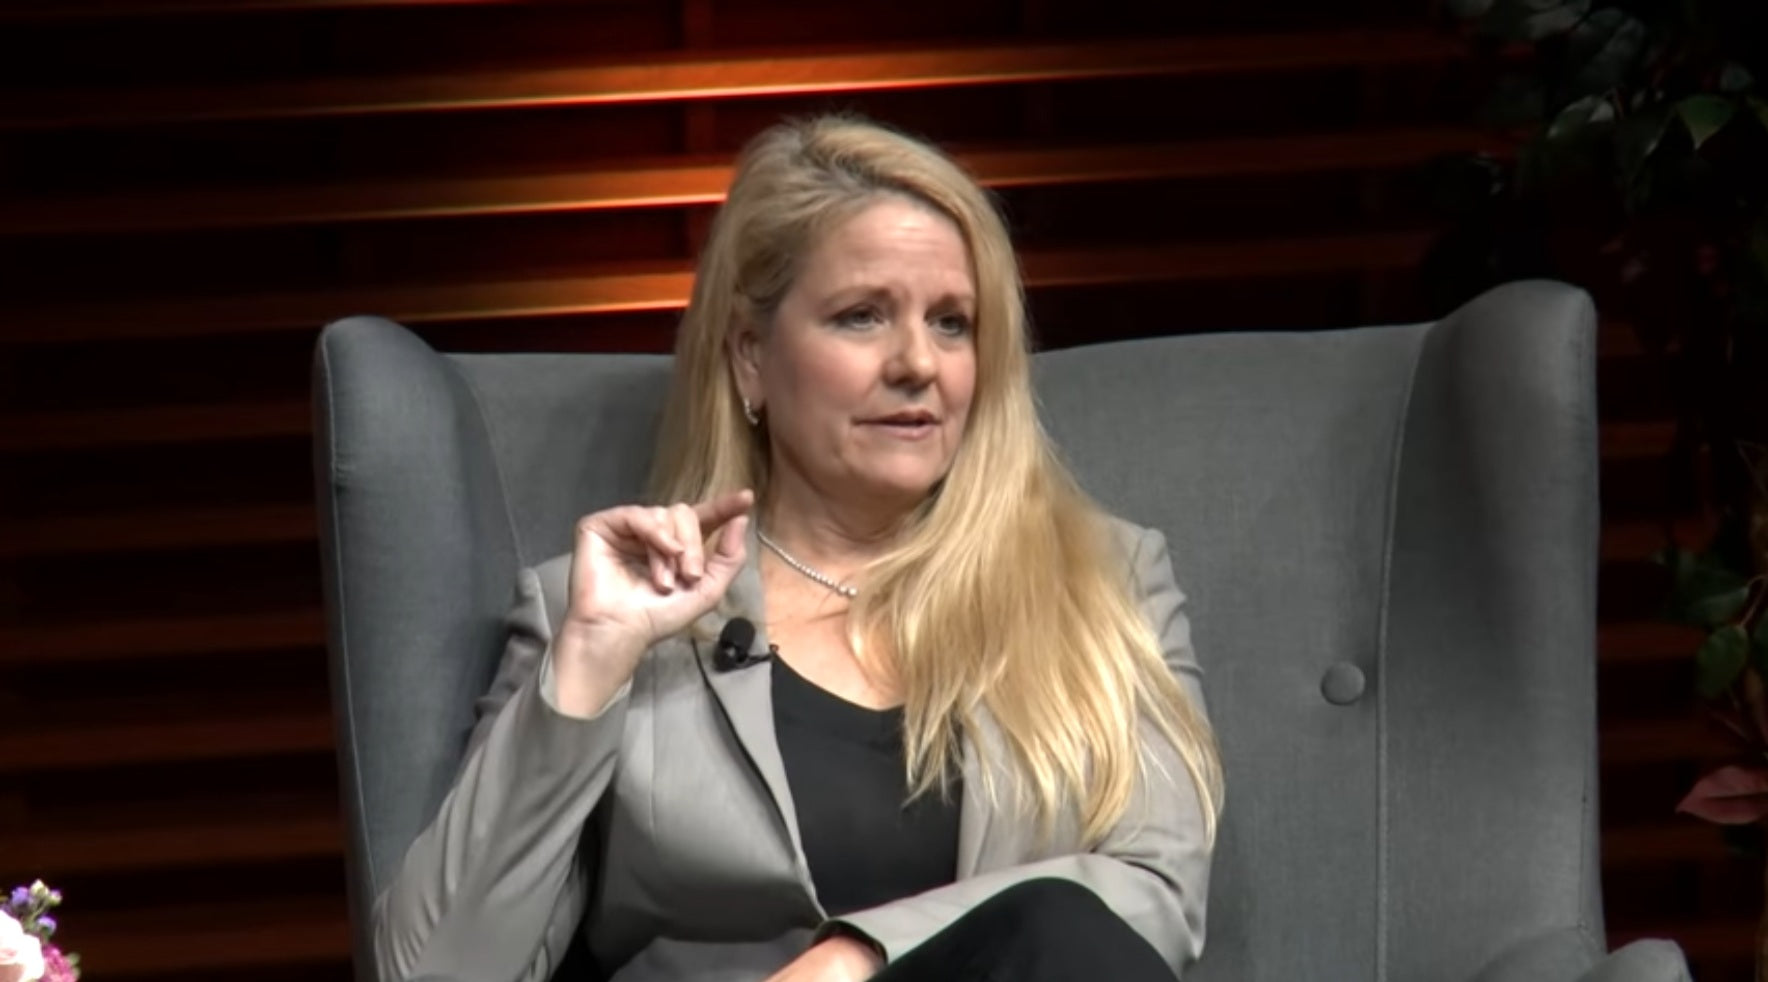 VIDEO: SpaceX President Gwynne Shotwell shares career anecdotes & gives advice to Stanford University students